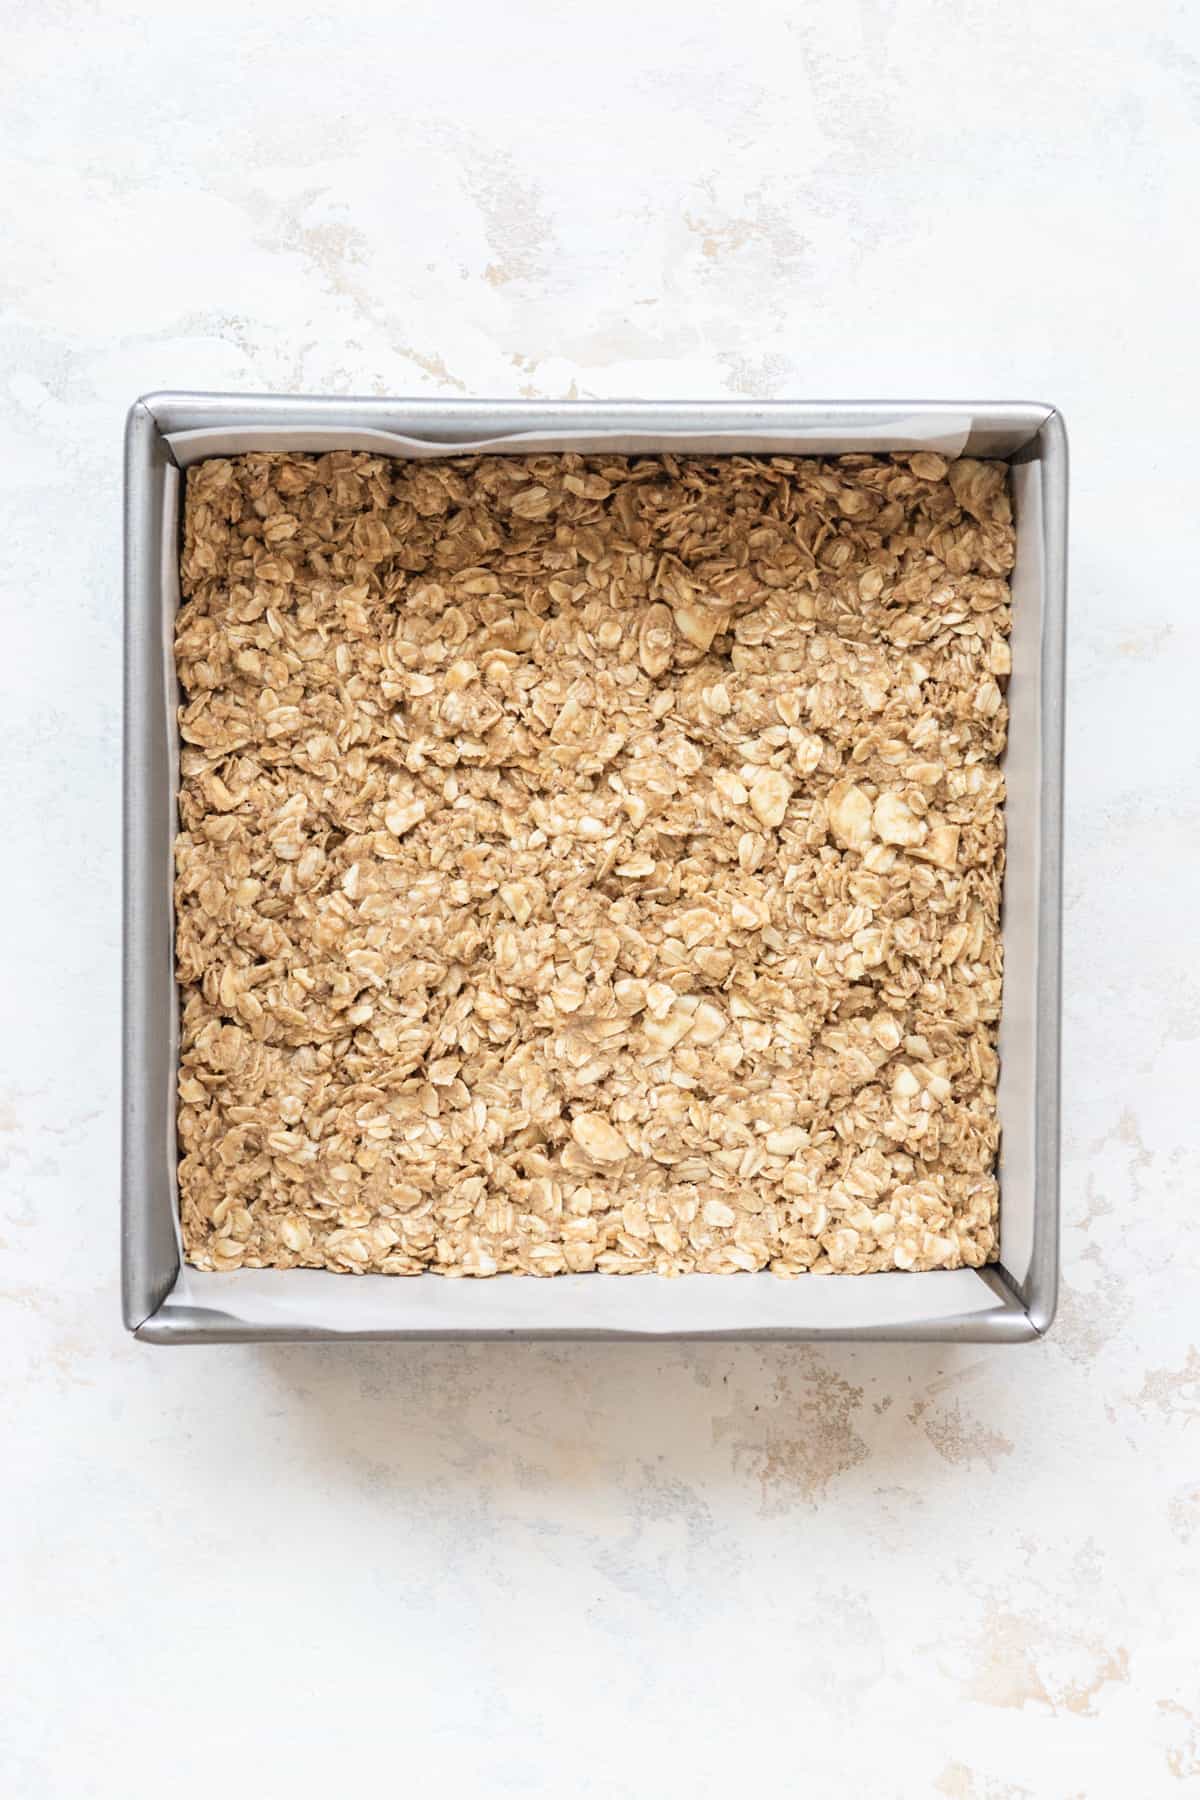 Granola base pressed down in a square baking pan.